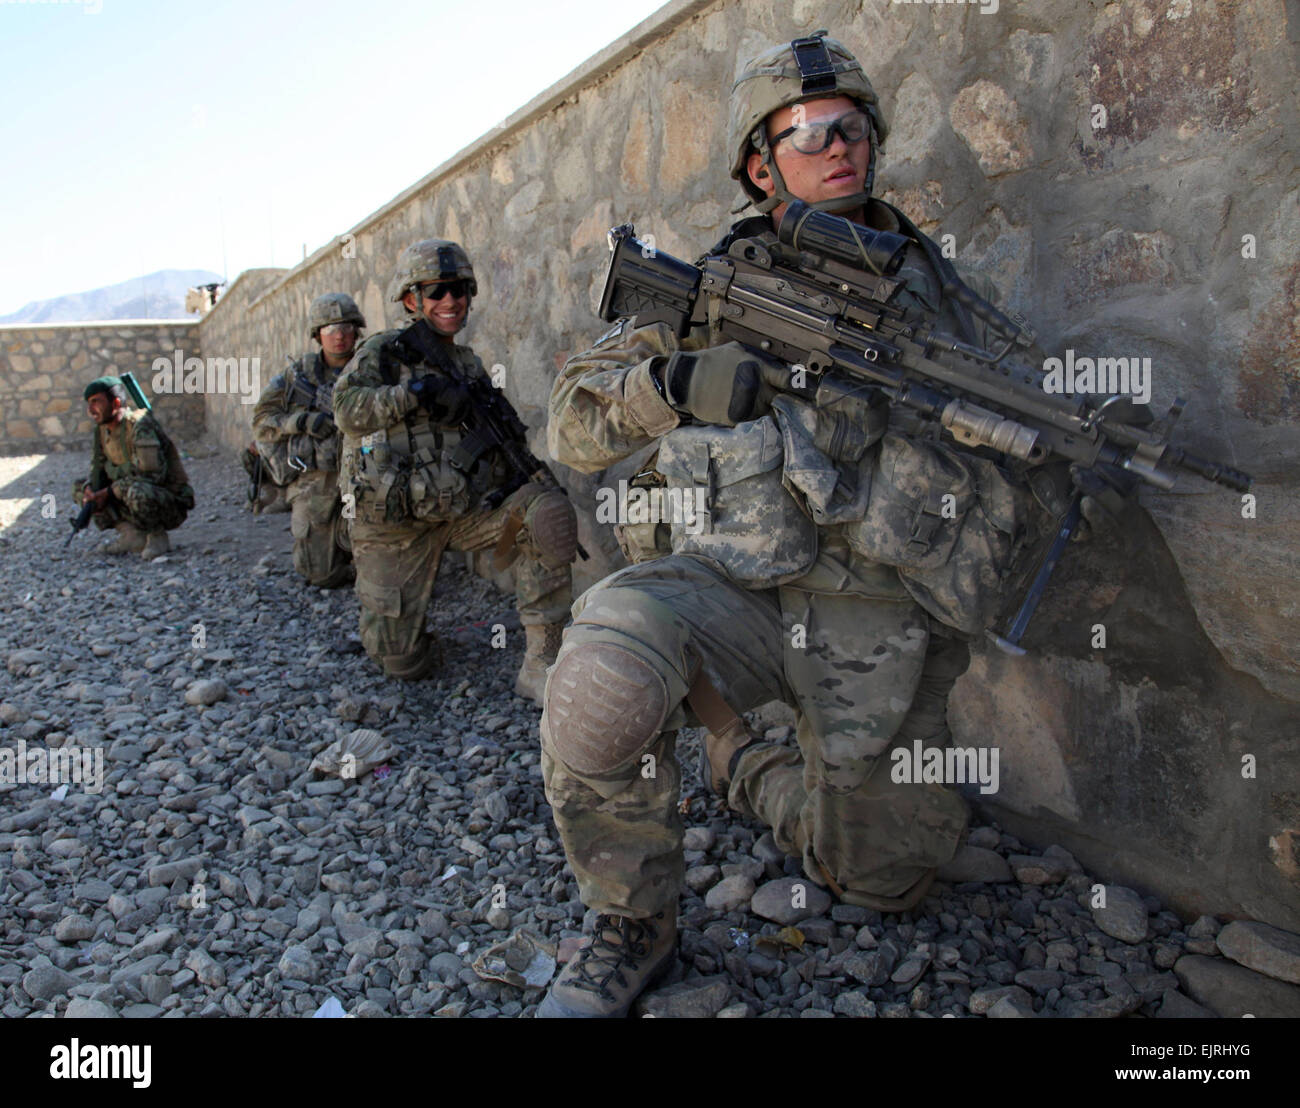 U.S. Army soldiers with Charlie Troop, 3rd Squadron, 89th Cavalry, 4th Infantry Brigade Combat Team, 10th Mountain Division wait for the order to move against enemy positions in Charkh, Logar province, Afghanistan, on Nov. 13, 2010.   Sgt. Sean P. Casey, U.S. Army.  Released Stock Photo